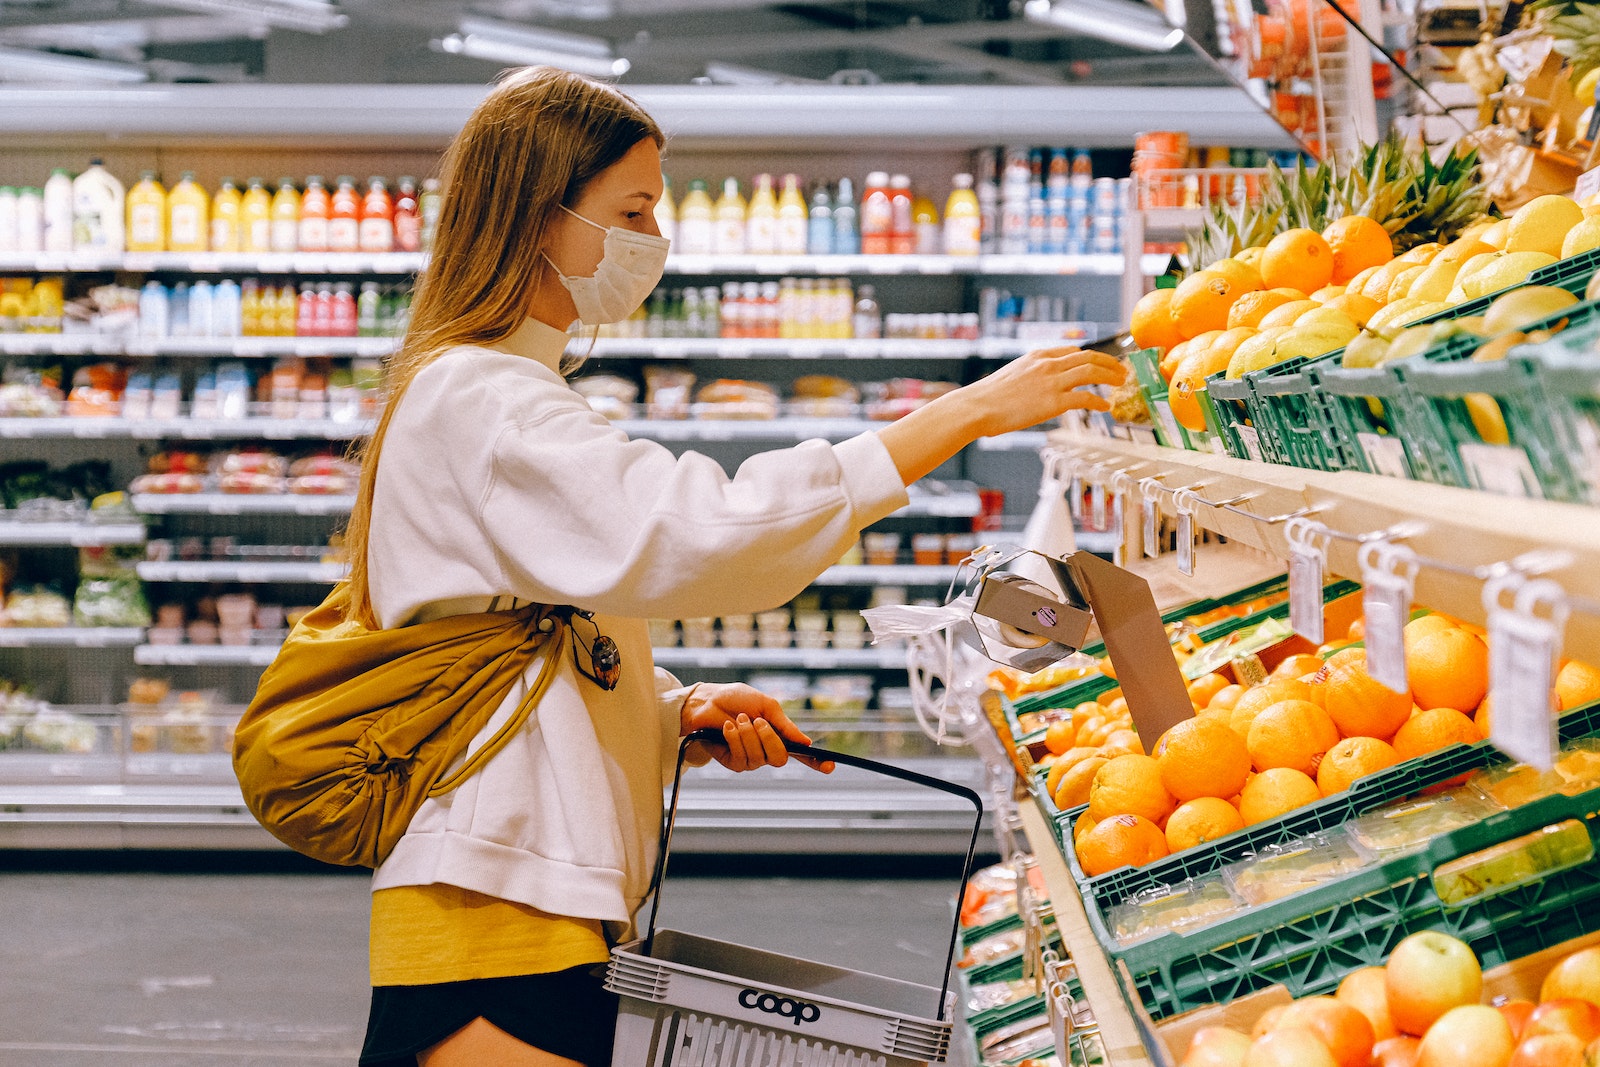 A healthy relationship with food through mindful eating mindful grocery